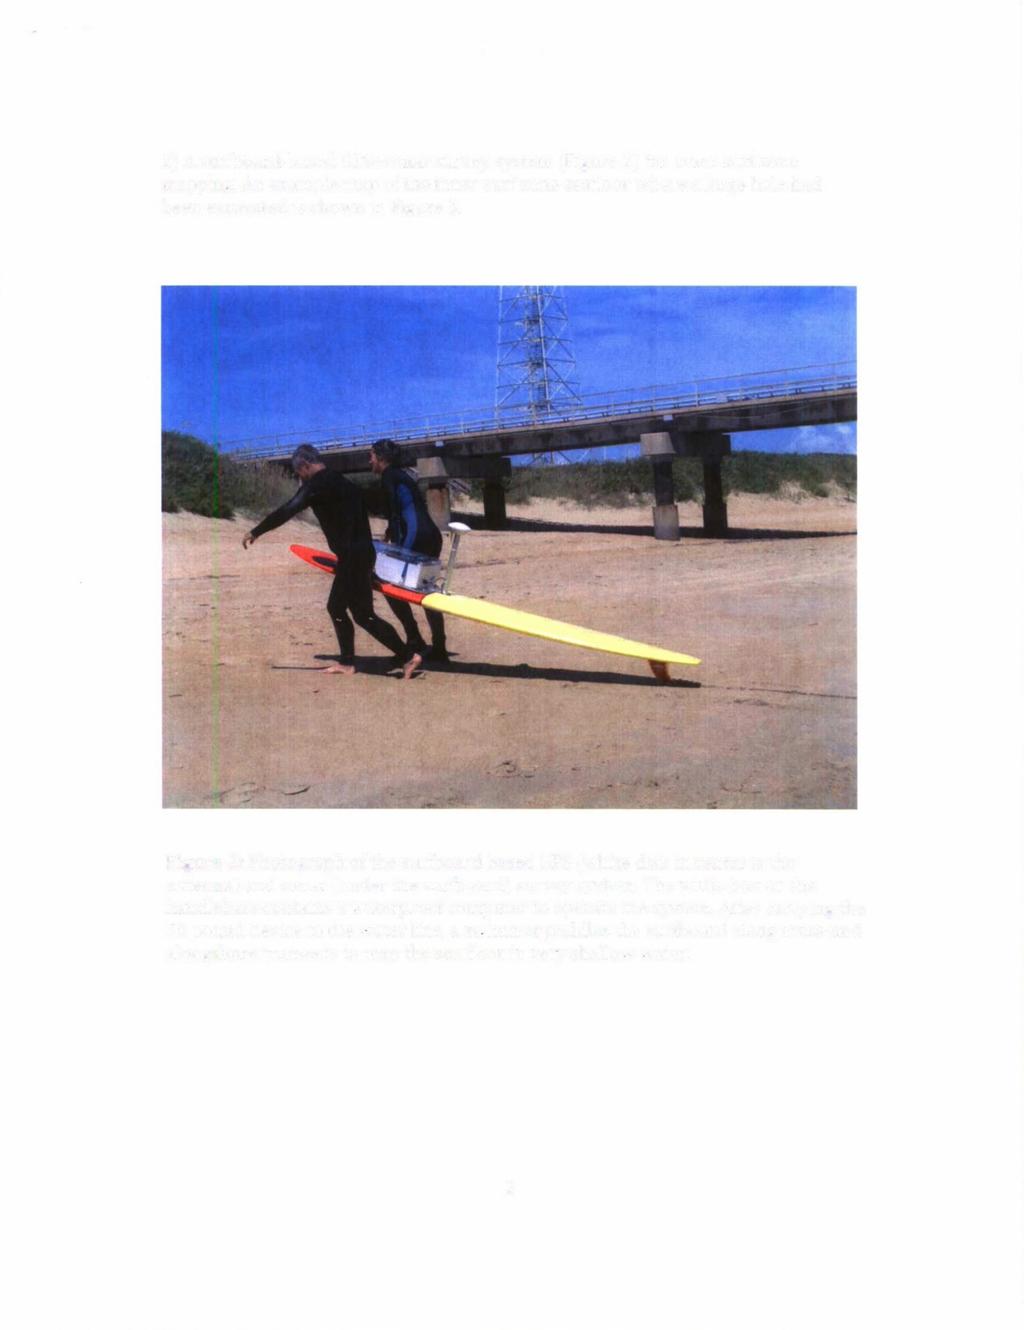 2) A surfboard-based GPS+sonar survey system (Figure 2) for inner surf zone mapping.